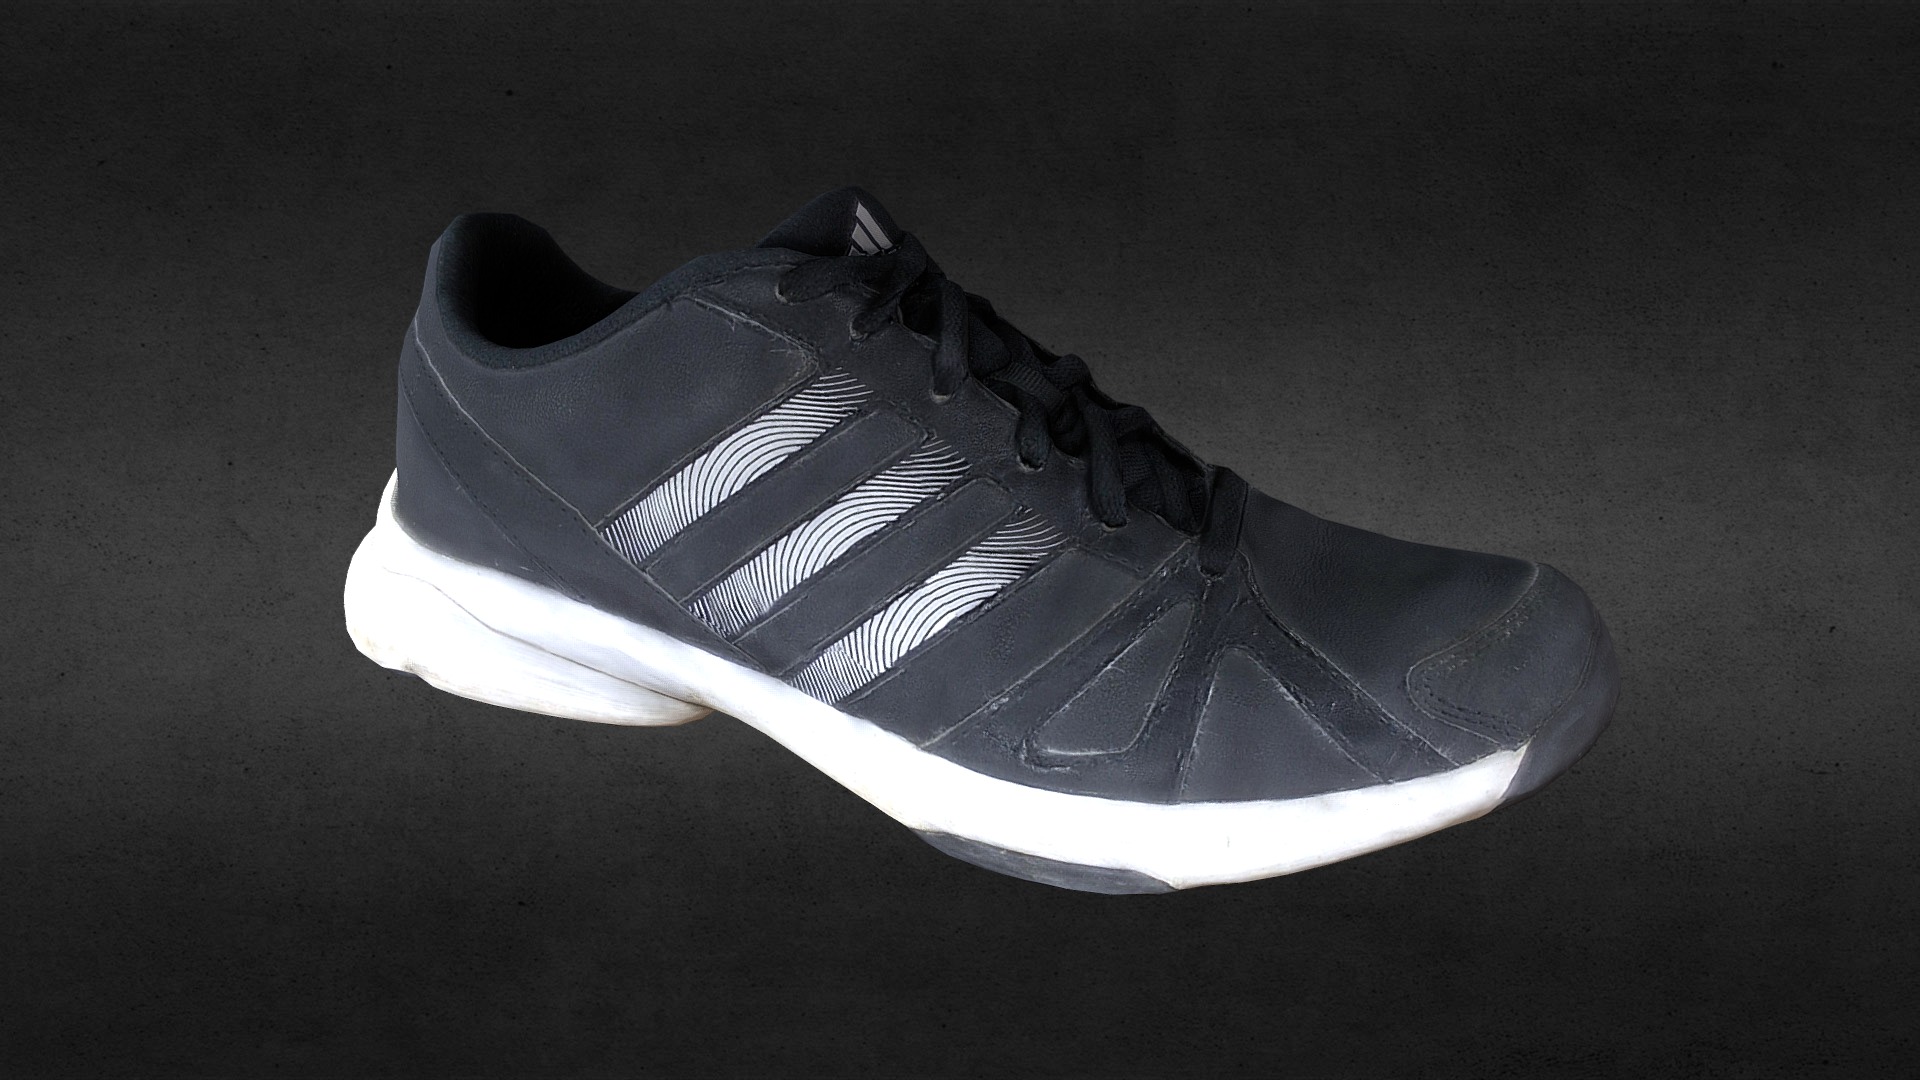 3D model Sneaker low poly - This is a 3D model of the Sneaker low poly. The 3D model is about a black and white shoe.